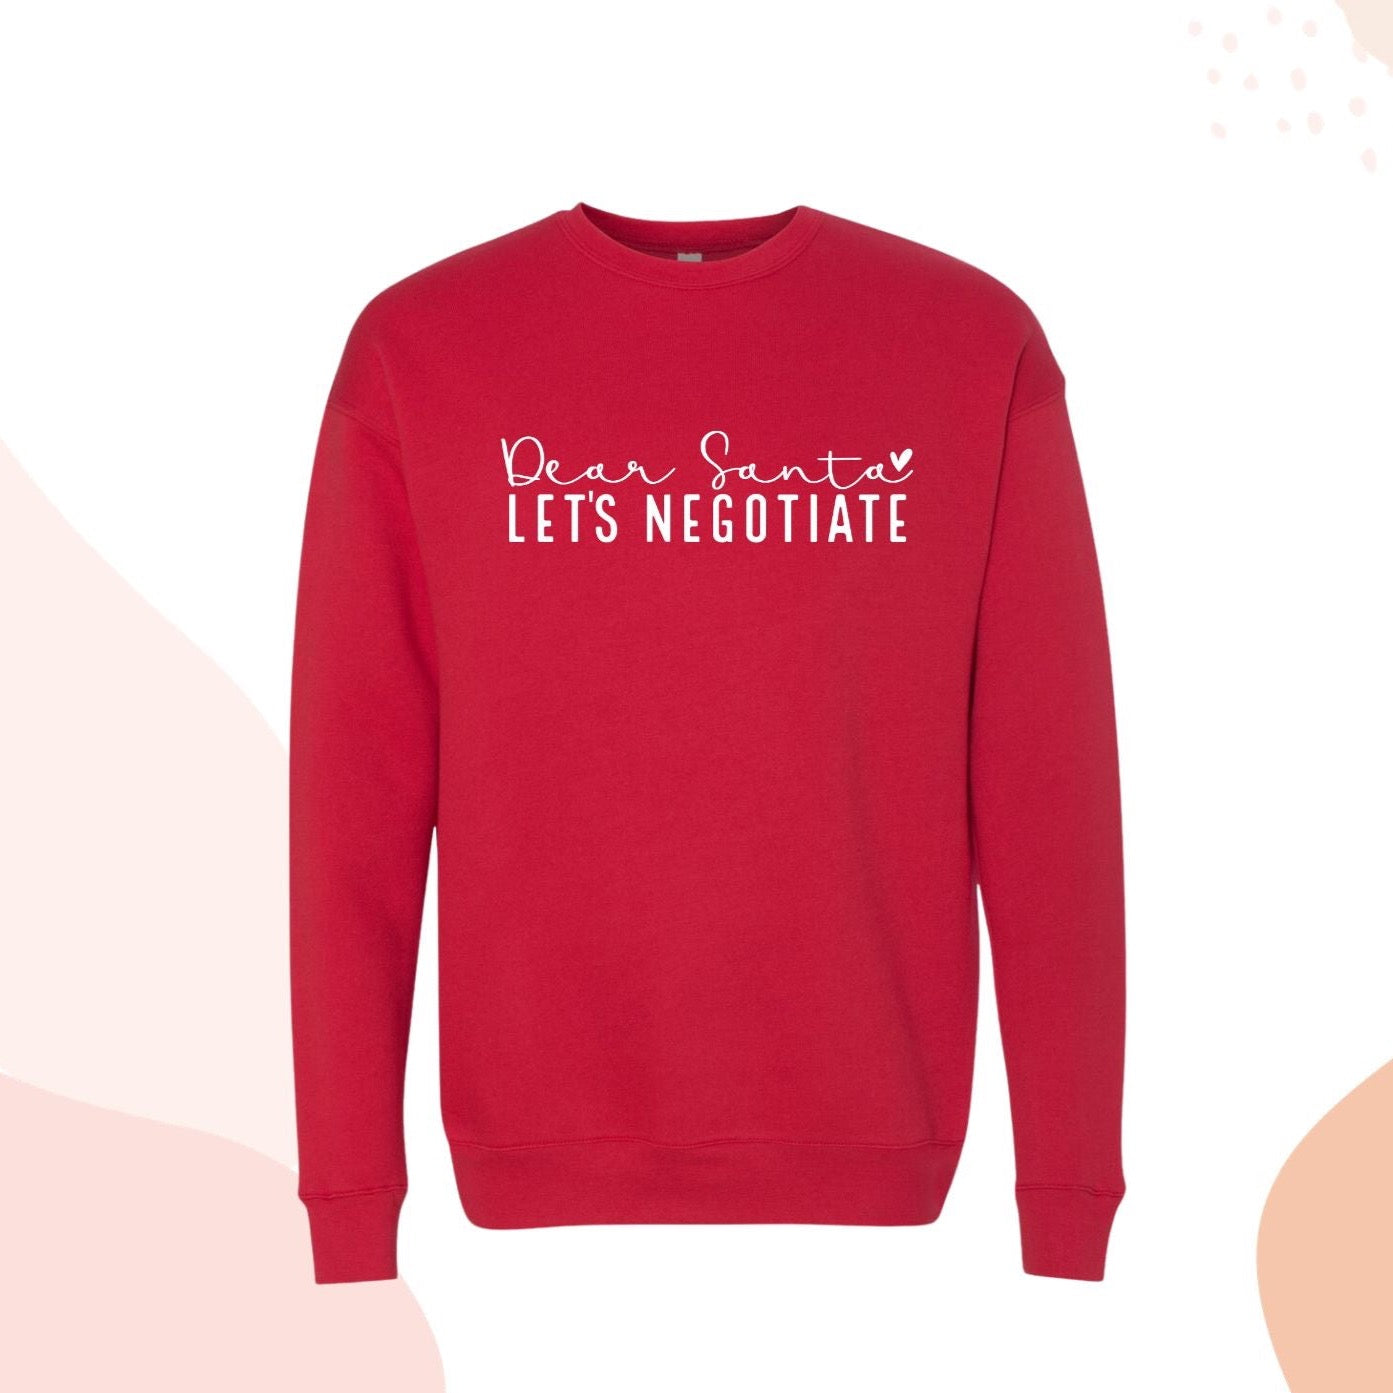 Christmas Sweatshirt Red Dear Santa Let's Negotiate, Funny Santa Claus Crewneck Sweater Red for Her, Cute gift for Teen Girt or Mom Red